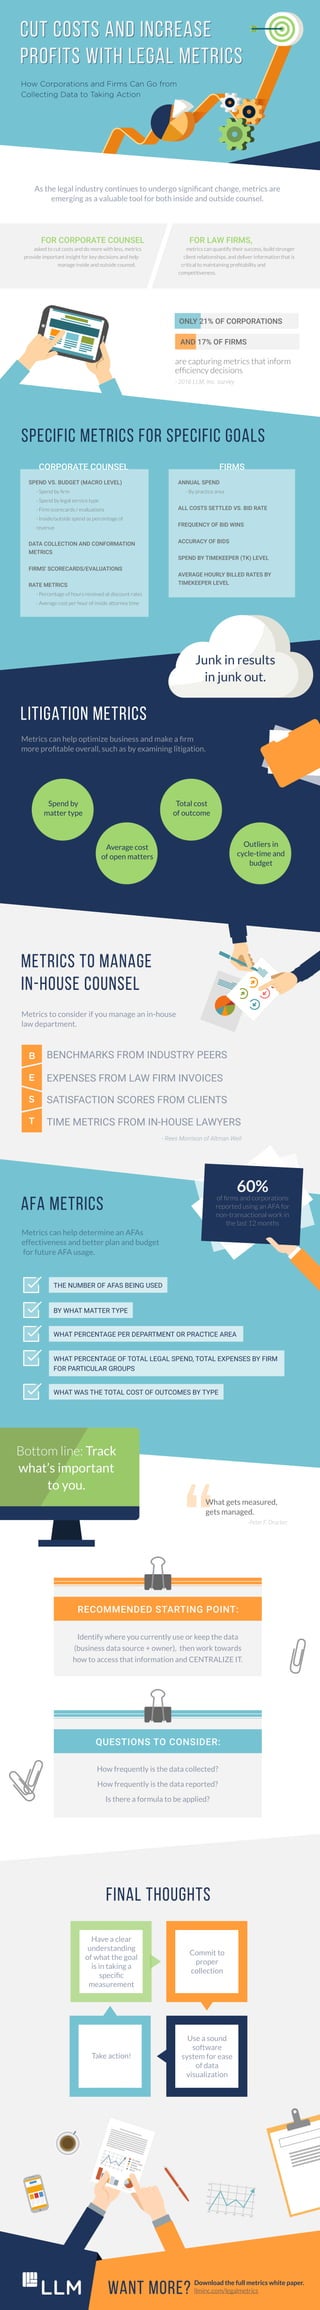 AFA METRICS
CUT COSTS AND INCREASE
PROFITS WITH LEGAL METRICS
CUT COSTS AND INCREASE
PROFITS WITH LEGAL METRICS
How Corporations and Firms Can Go from
Collecting Data to Taking Action
As the legal industry continues to undergo signiﬁcant change, metrics are
emerging as a valuable tool for both inside and outside counsel.
are capturing metrics that inform
efﬁciency decisions
- 2016 LLM, Inc. survey
FOR CORPORATE COUNSEL
asked to cut costs and do more with less, metrics
provide important insight for key decisions and help
manage inside and outside counsel.
FOR LAW FIRMS,
metrics can quantify their success, build stronger
client relationships, and deliver information that is
critical to maintaining proﬁtability and
competitiveness.
SPECIFIC METRICS FOR SPECIFIC GOALS
LITIGATION METRICS
METRICS TO MANAGE
IN-HOUSE COUNSEL
CORPORATE COUNSEL
Metrics can help optimize business and make a ﬁrm
more proﬁtable overall, such as by examining litigation.
Metrics can help determine an AFAs
effectiveness and better plan and budget
for future AFA usage.
FINAL THOUGHTS
Metrics to consider if you manage an in-house
law department.
What gets measured,
gets managed.
-Peter F. Drucker
FIRMS
SPEND VS. BUDGET (MACRO LEVEL)
- Spend by ﬁrm
- Spend by legal service type
- Firm scorecards / evaluations
- Inside/outside spend as percentage of
revenue
DATA COLLECTION AND CONFORMATION
METRICS
FIRMS' SCORECARDS/EVALUATIONS
RATE METRICS
- Percentage of hours received at discount rates
- Average cost per hour of inside attorney time
ANNUAL SPEND
- By practice area
ALL COSTS SETTLED VS. BID RATE
FREQUENCY OF BID WINS
ACCURACY OF BIDS
SPEND BY TIMEKEEPER (TK) LEVEL
AVERAGE HOURLY BILLED RATES BY
TIMEKEEPER LEVEL
Junk in results
in junk out.
Spend by
matter type
Average cost
of open matters
Outliers in
cycle-time and
budget
Total cost
of outcome
BENCHMARKS FROM INDUSTRY PEERS
EXPENSES FROM LAW FIRM INVOICES
SATISFACTION SCORES FROM CLIENTS
TIME METRICS FROM IN-HOUSE LAWYERS
- Rees Morrison of Altman Weil
ONLY 21% OF CORPORATIONS
AND 17% OF FIRMS
Bottom line: Track
what’s important
to you.
Download the full metrics white paper.
llminc.com/legalmetricsWANT MORE?
60%
of ﬁrms and corporations
reported using an AFA for
non-transactional work in
the last 12 months
RECOMMENDED STARTING POINT:
QUESTIONS TO CONSIDER:
Identify where you currently use or keep the data
(business data source + owner), then work towards
how to access that information and CENTRALIZE IT.
How frequently is the data collected?
How frequently is the data reported?
Is there a formula to be applied?
THE NUMBER OF AFAS BEING USED
BY WHAT MATTER TYPE
WHAT PERCENTAGE PER DEPARTMENT OR PRACTICE AREA
WHAT PERCENTAGE OF TOTAL LEGAL SPEND, TOTAL EXPENSES BY FIRM
FOR PARTICULAR GROUPS
WHAT WAS THE TOTAL COST OF OUTCOMES BY TYPE
Have a clear
understanding
of what the goal
is in taking a
speciﬁc
measurement
Commit to
proper
collection
Take action!
Use a sound
software
system for ease
of data
visualization
 